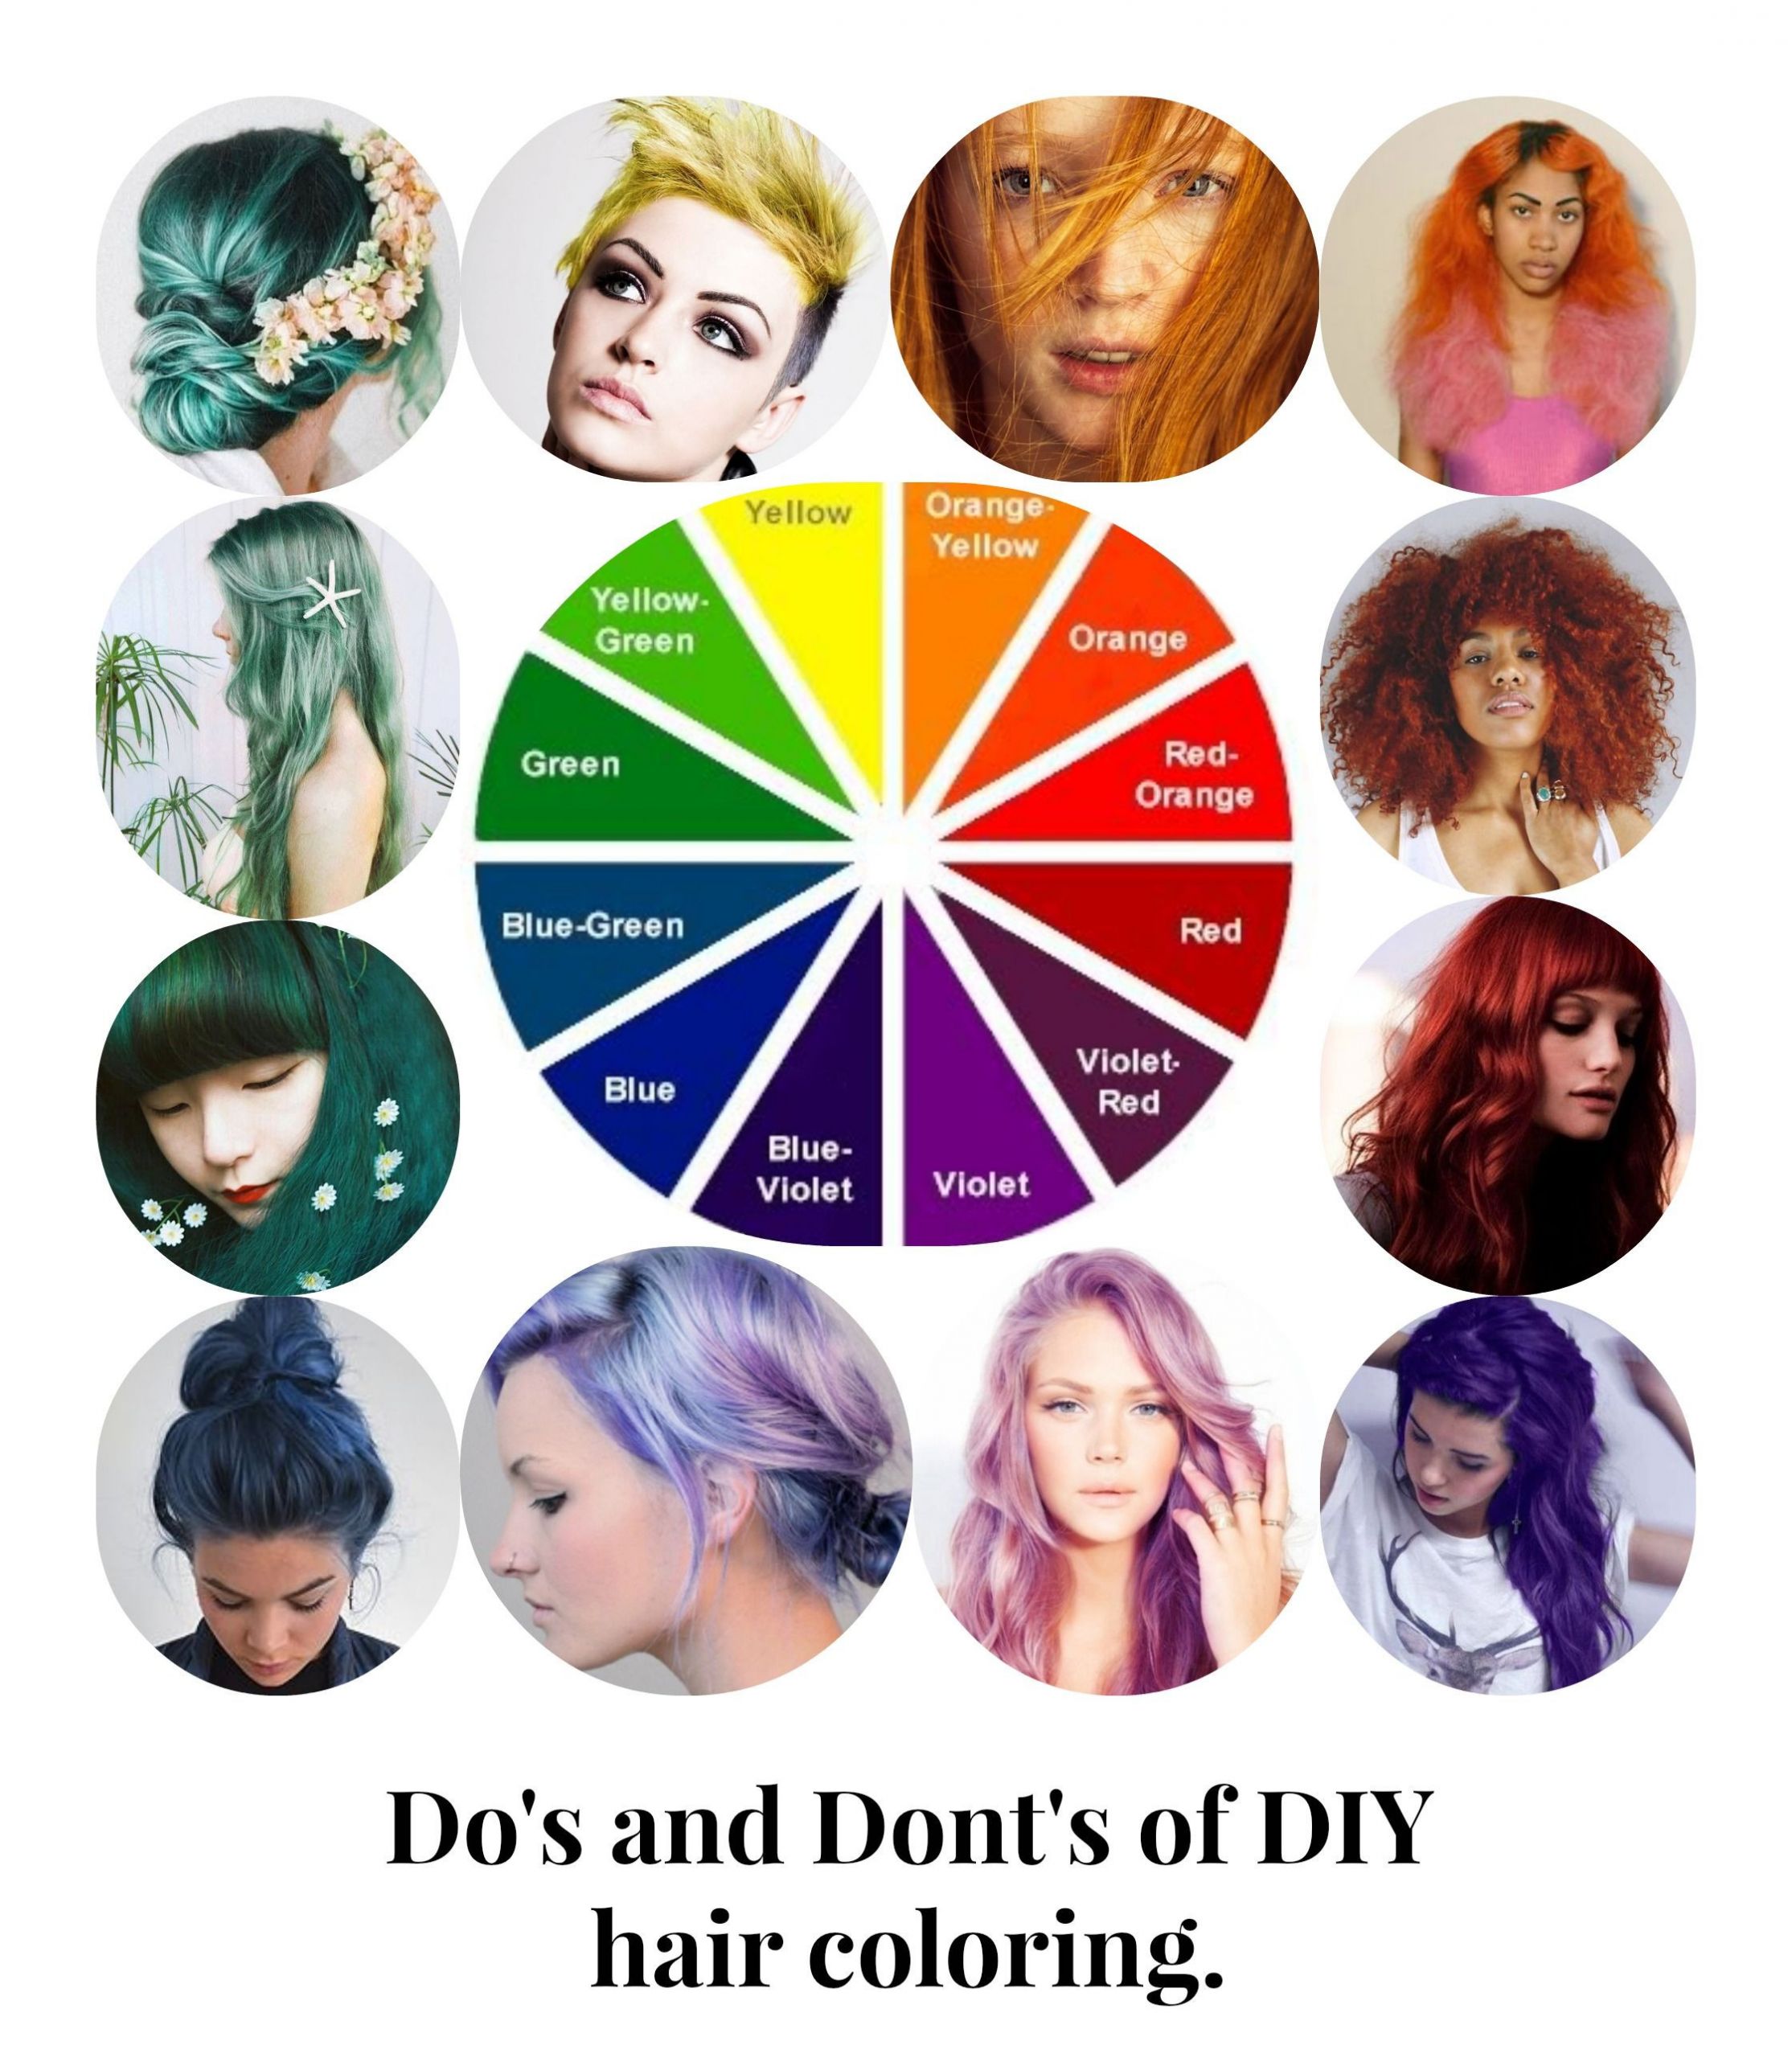 DIY Blue Toner For Orange Hair
 The color wheel applied to hair dye and toner selection